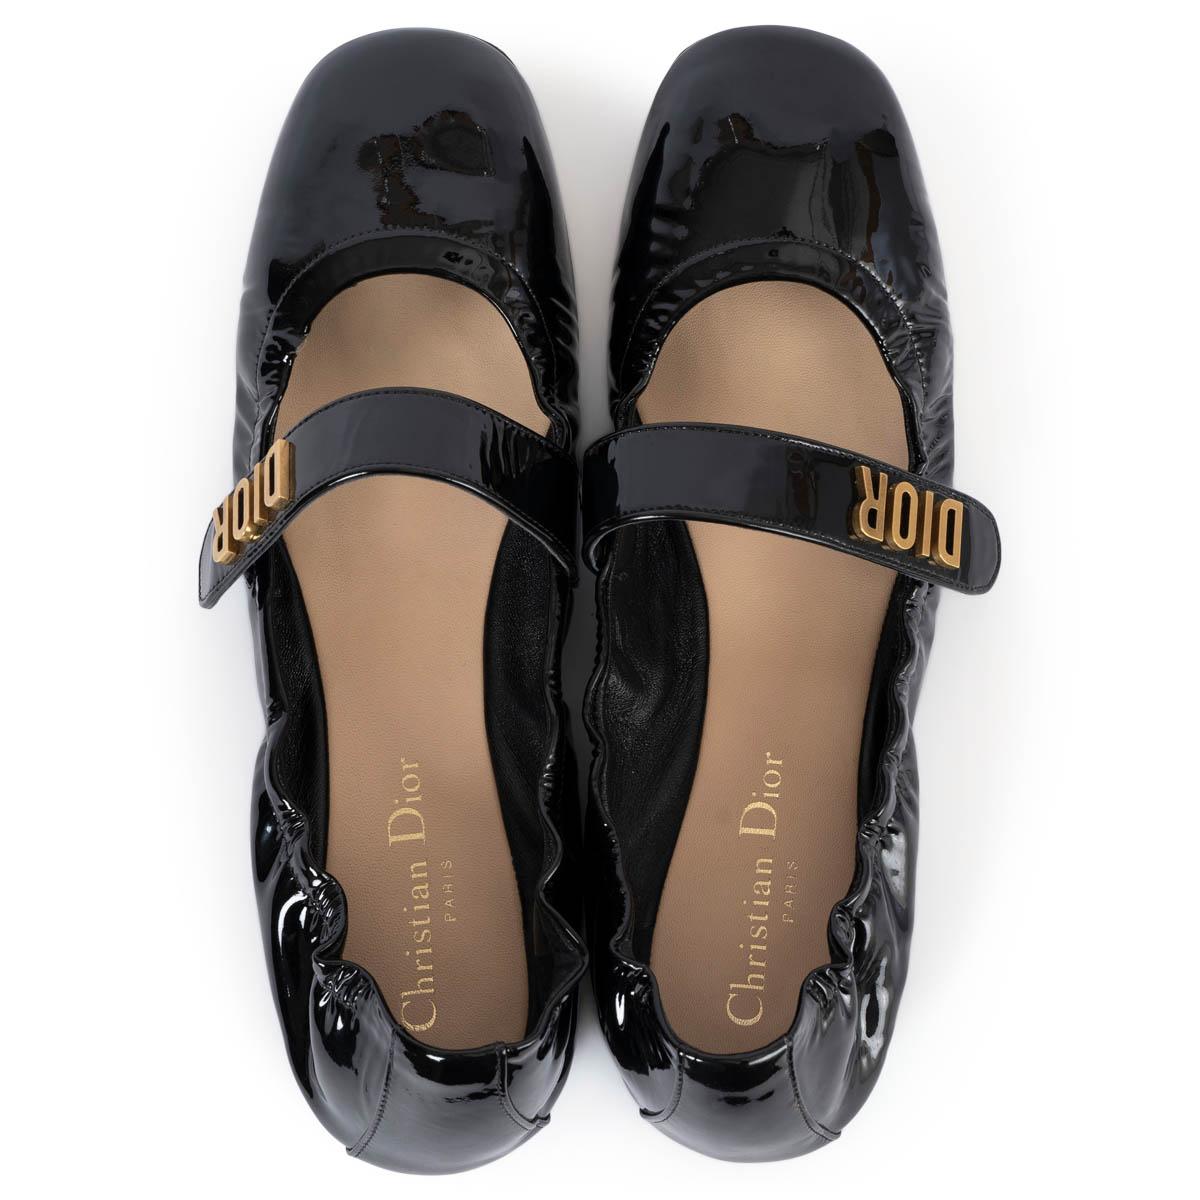 CHRISTIAN DIOR black patent leather BABY-D BALLET Flats Shoes 39 2